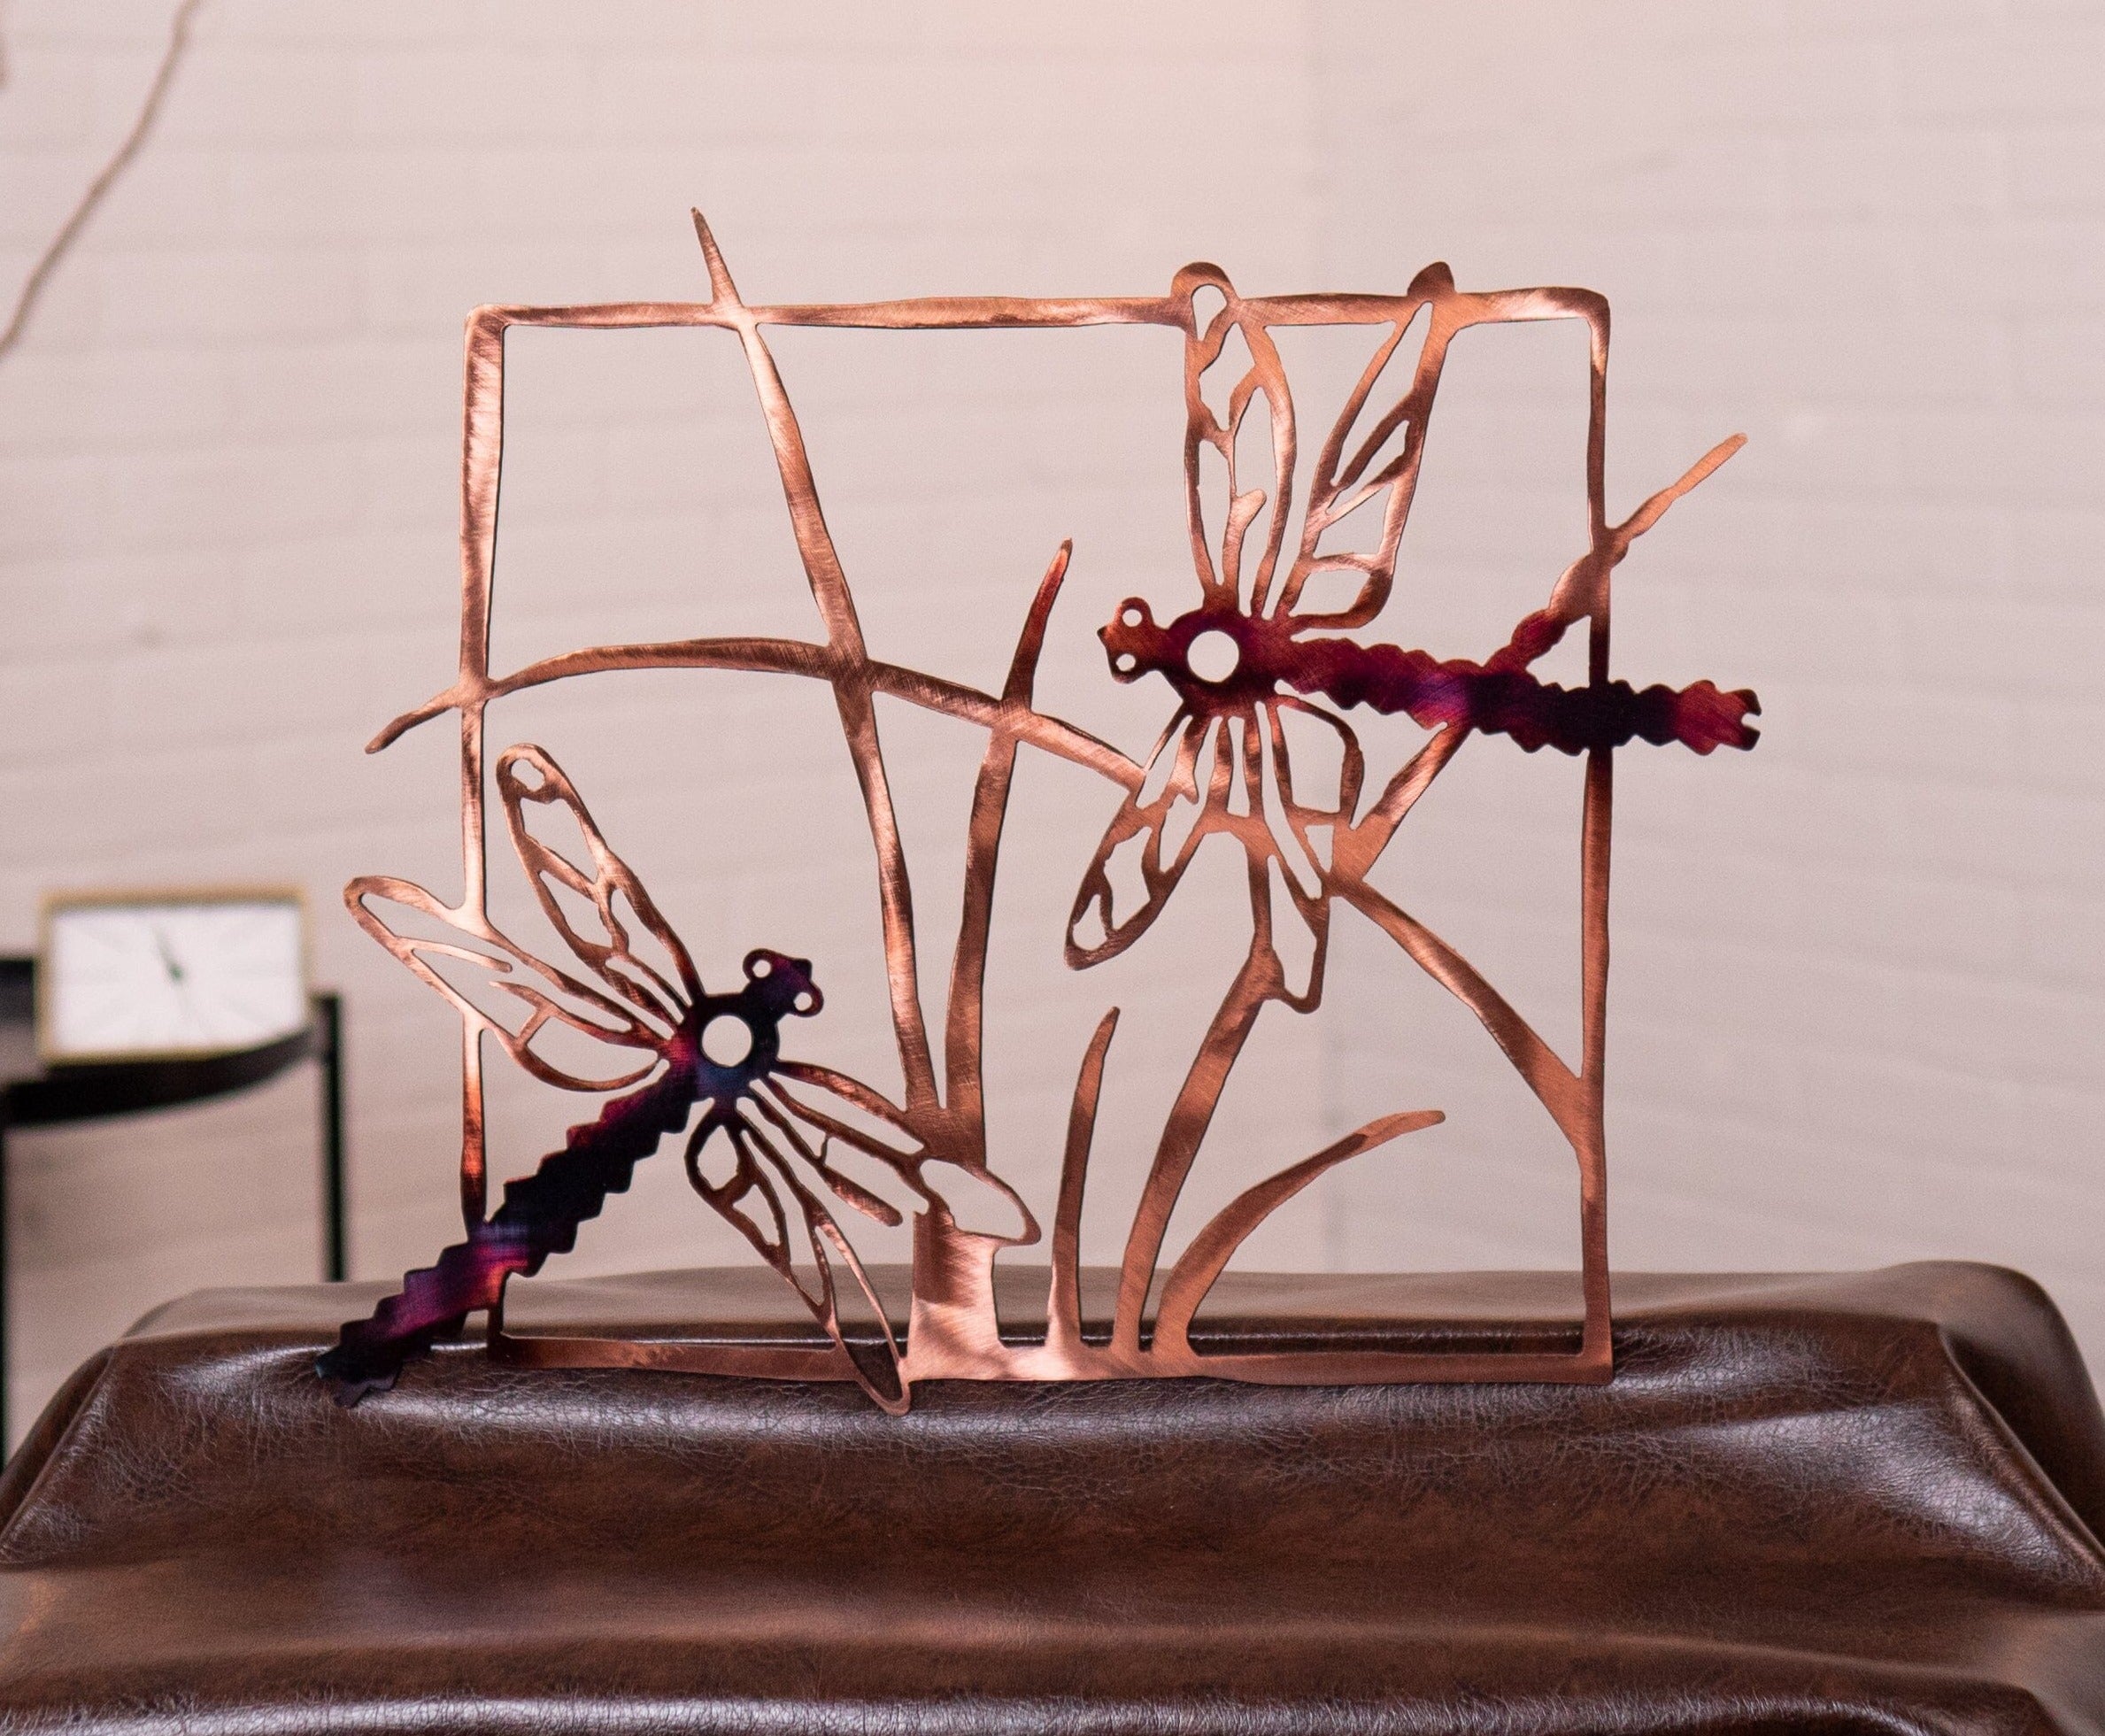 Dragonfly Dance Wall Art Third Shift Fabrication Copper Torch No Mounting Kit $65.00 